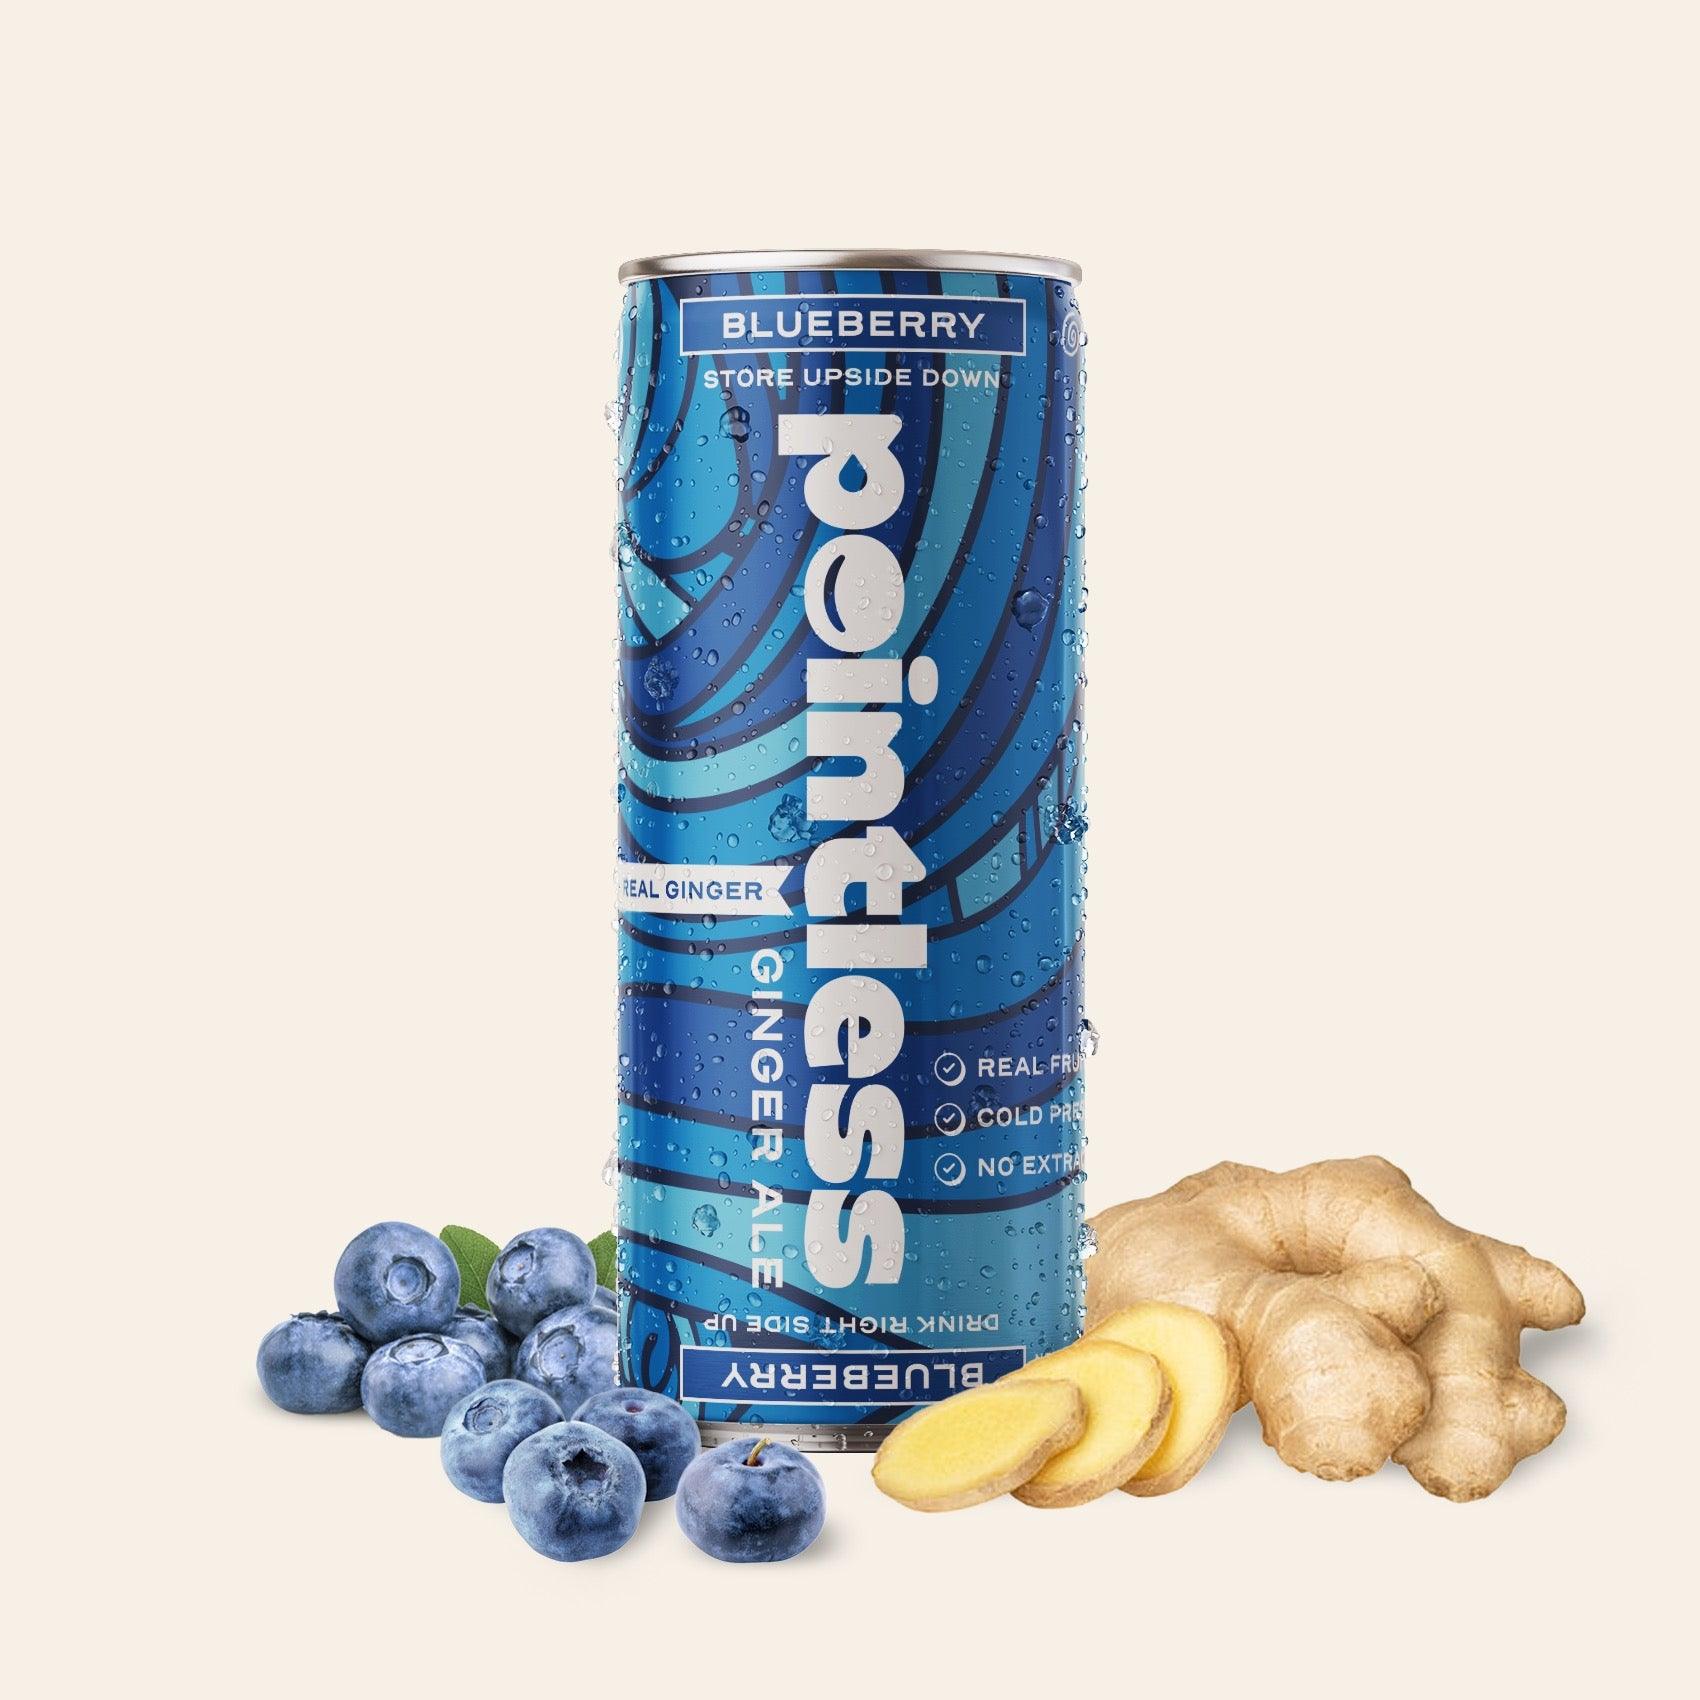 a can of blueberry ginger ale with blueberries and ginger